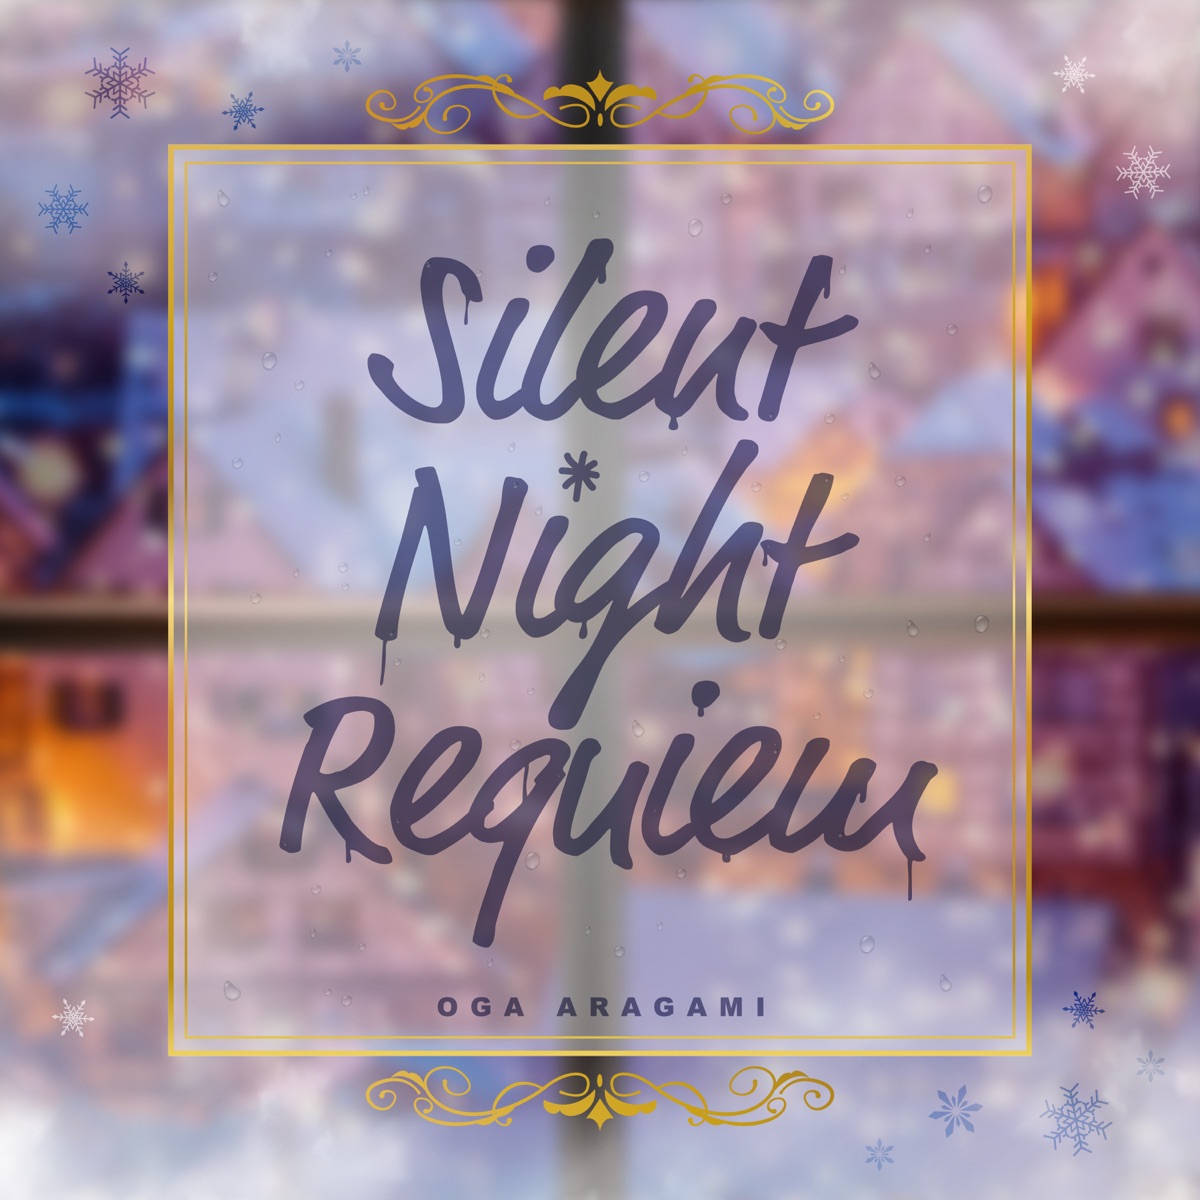 Cover art for『Aragami Oga - Silent Night Requiem』from the release『Silent Night Requiem』